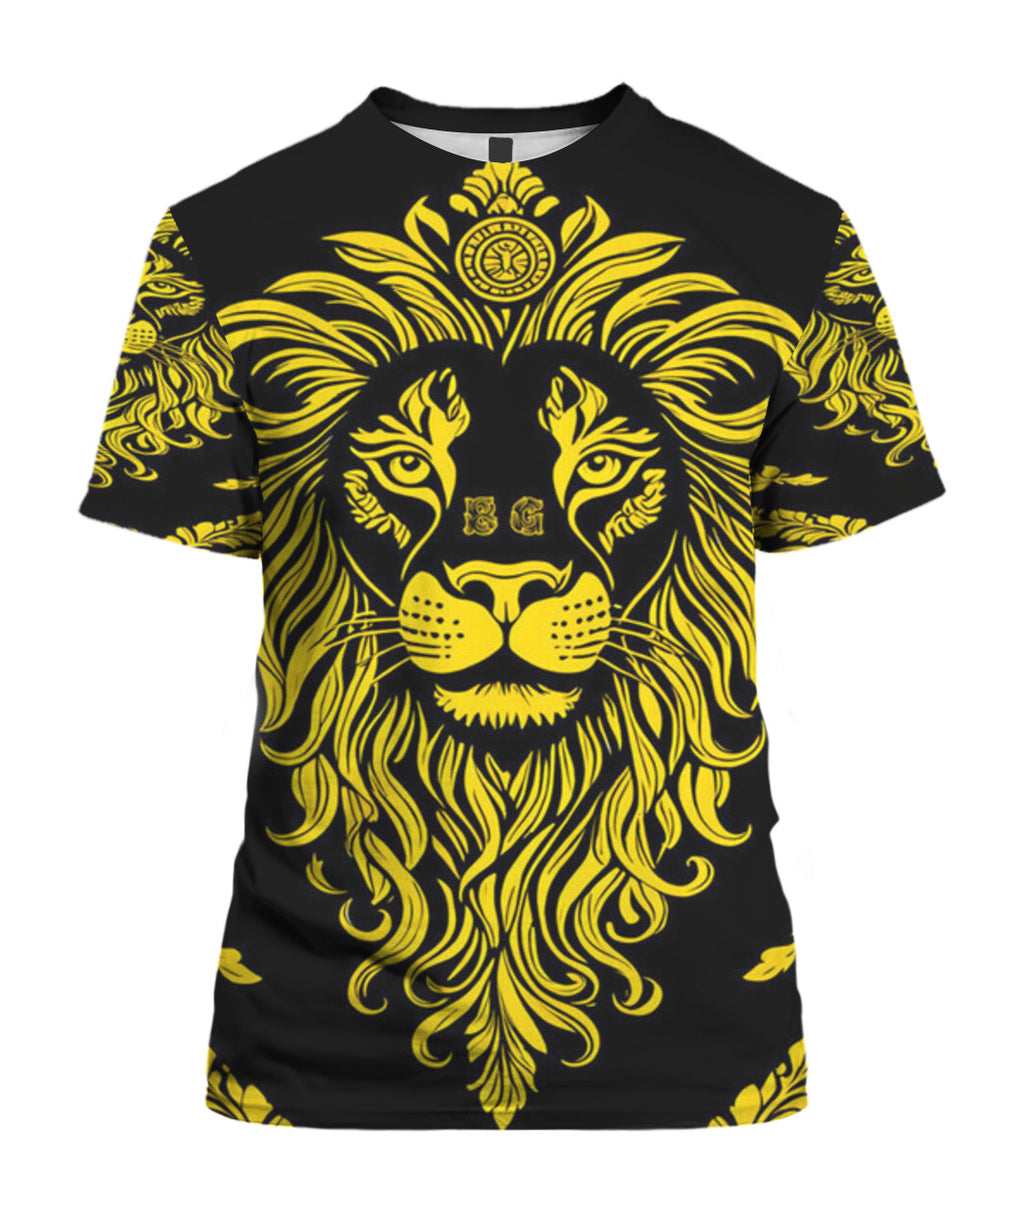 Black and Yellow Lion Unisex T-Shirt by Burning Guitars